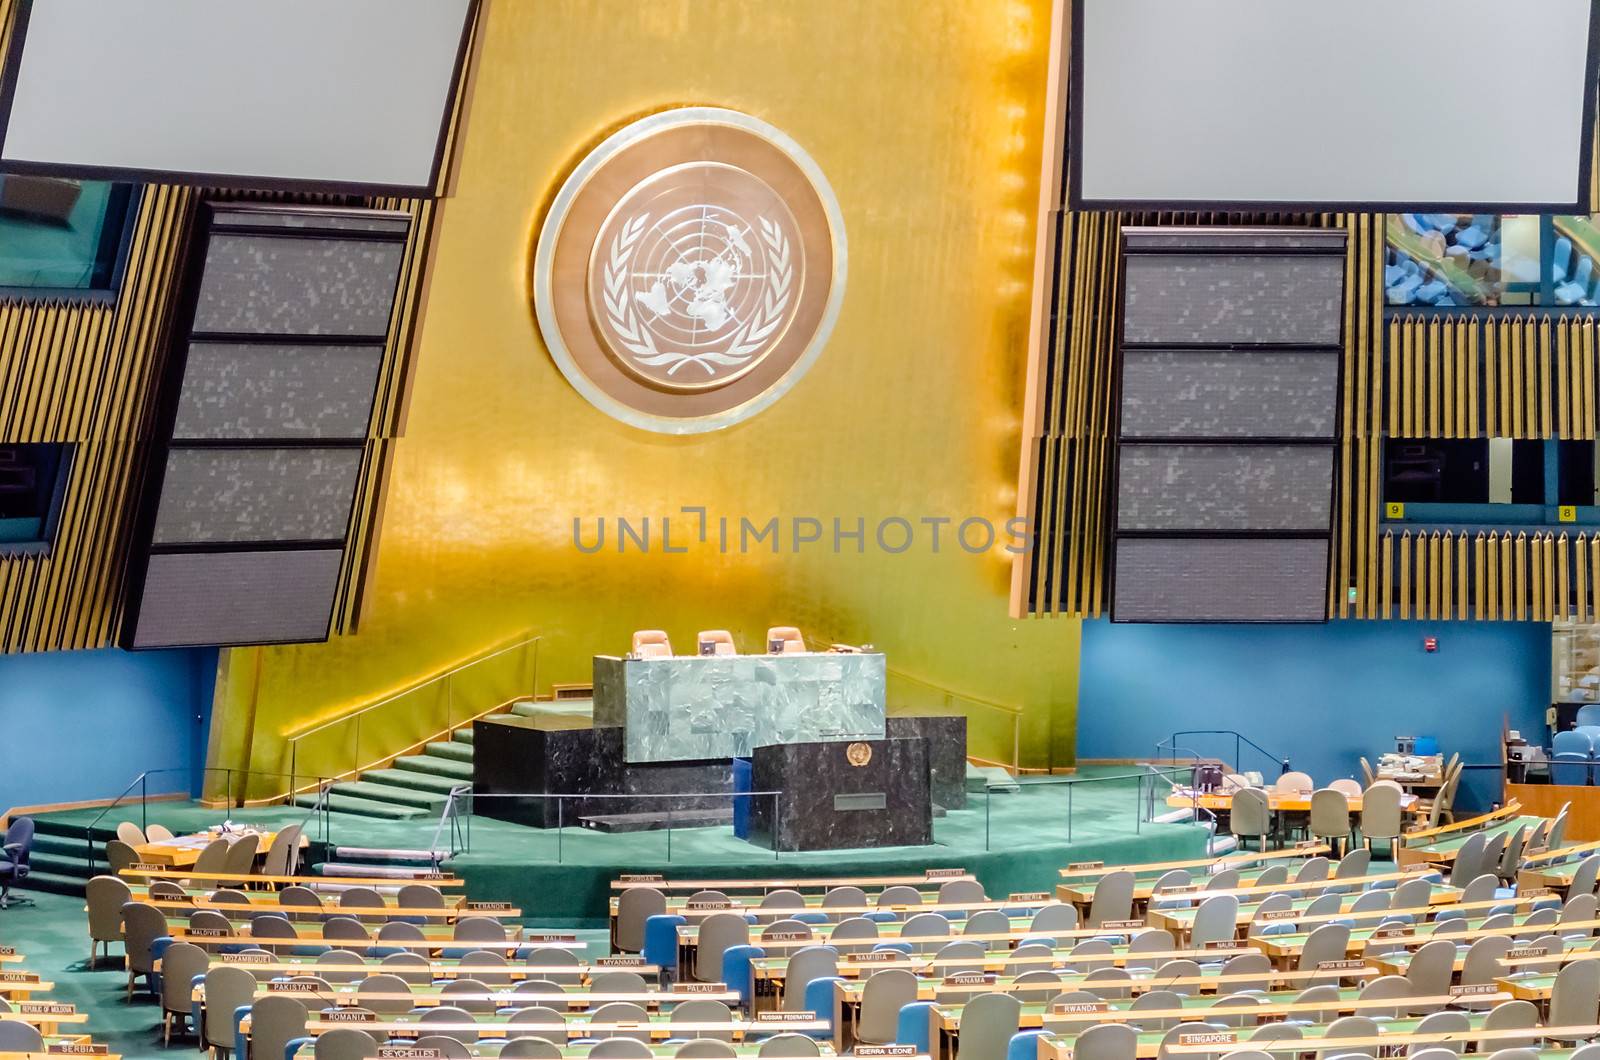 NEW YORK - MAY 28: The General Assembly Hall is the largest room in the United Nations with seating capacity for over 1,800 people. May 28, 2013 in Manhattan, New York City